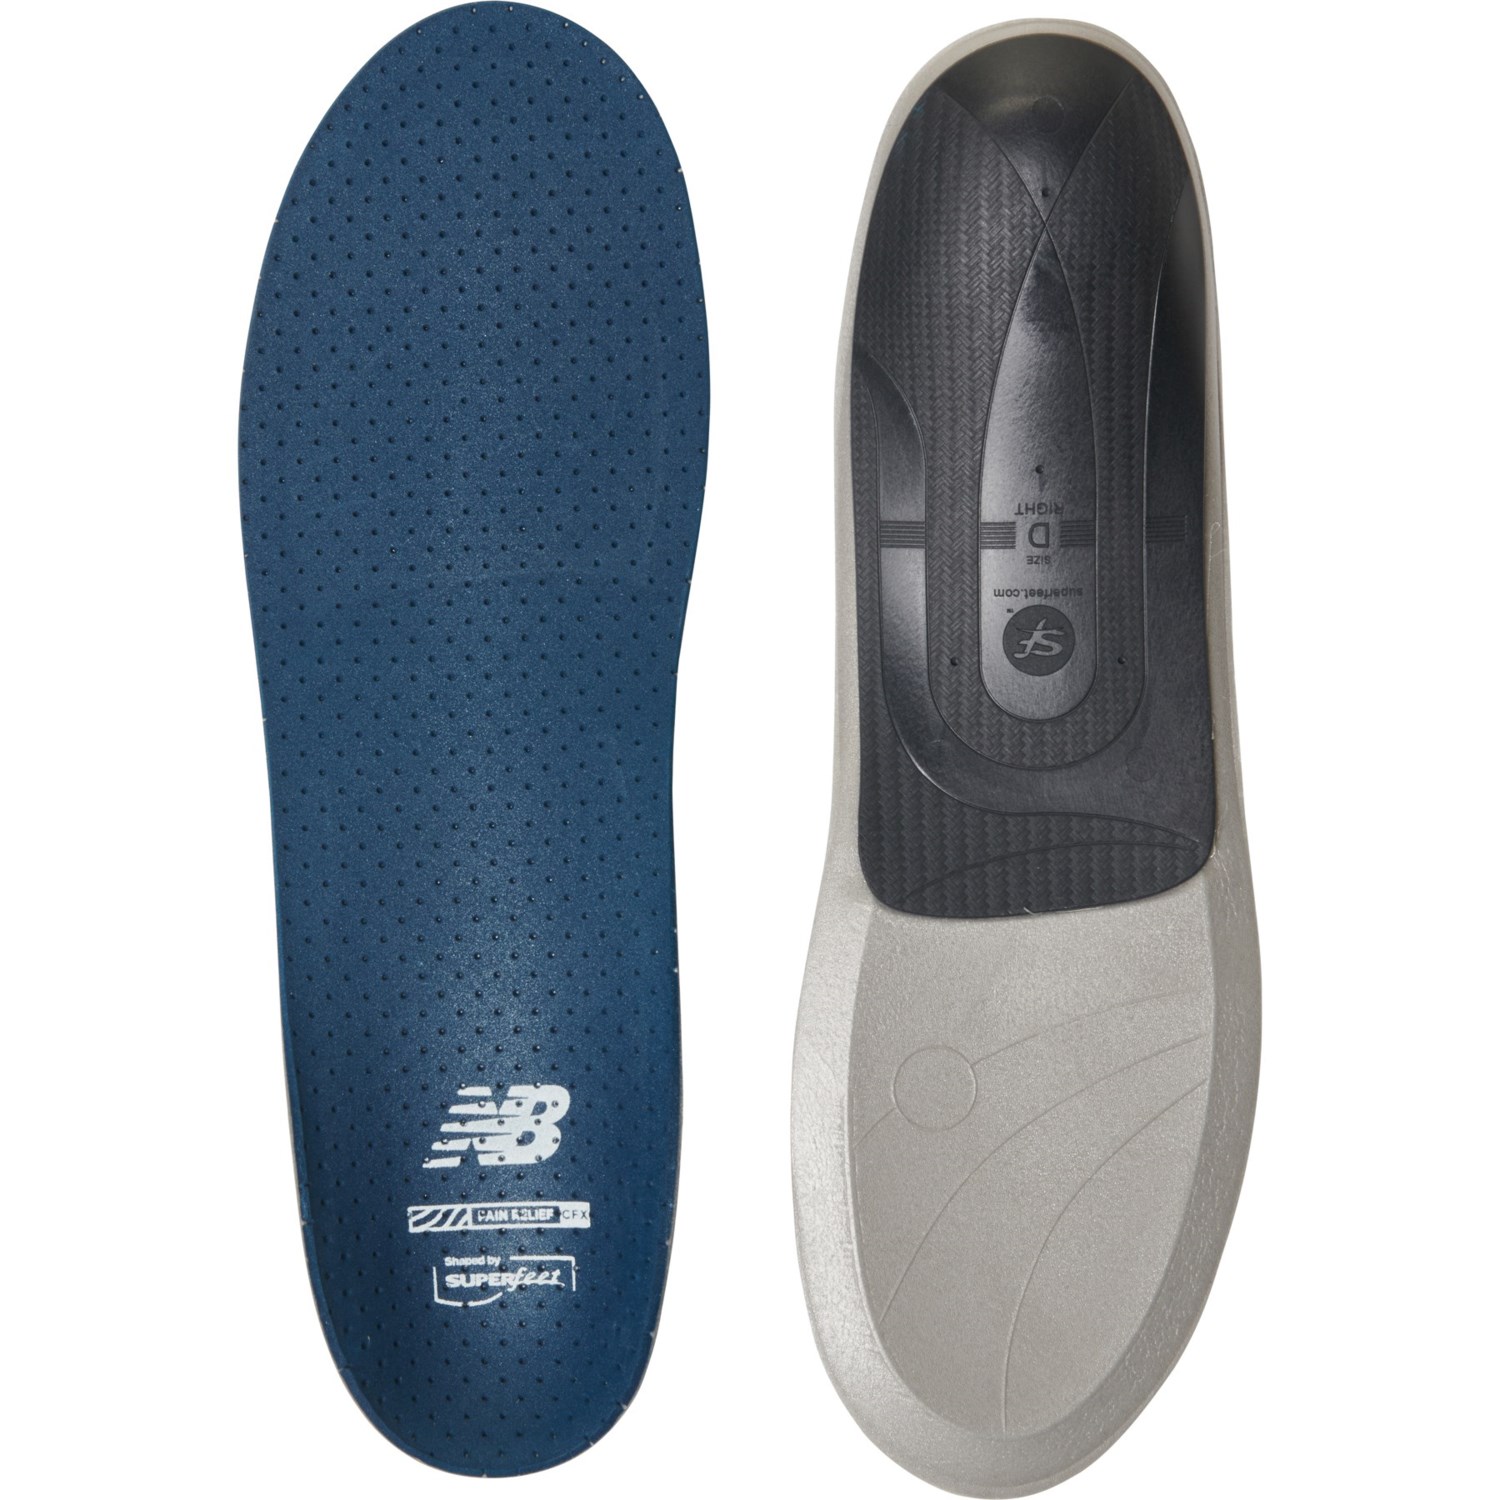 New Balance by Superfeet CFX Pain Relief Insole Inserts (For Men and Women)